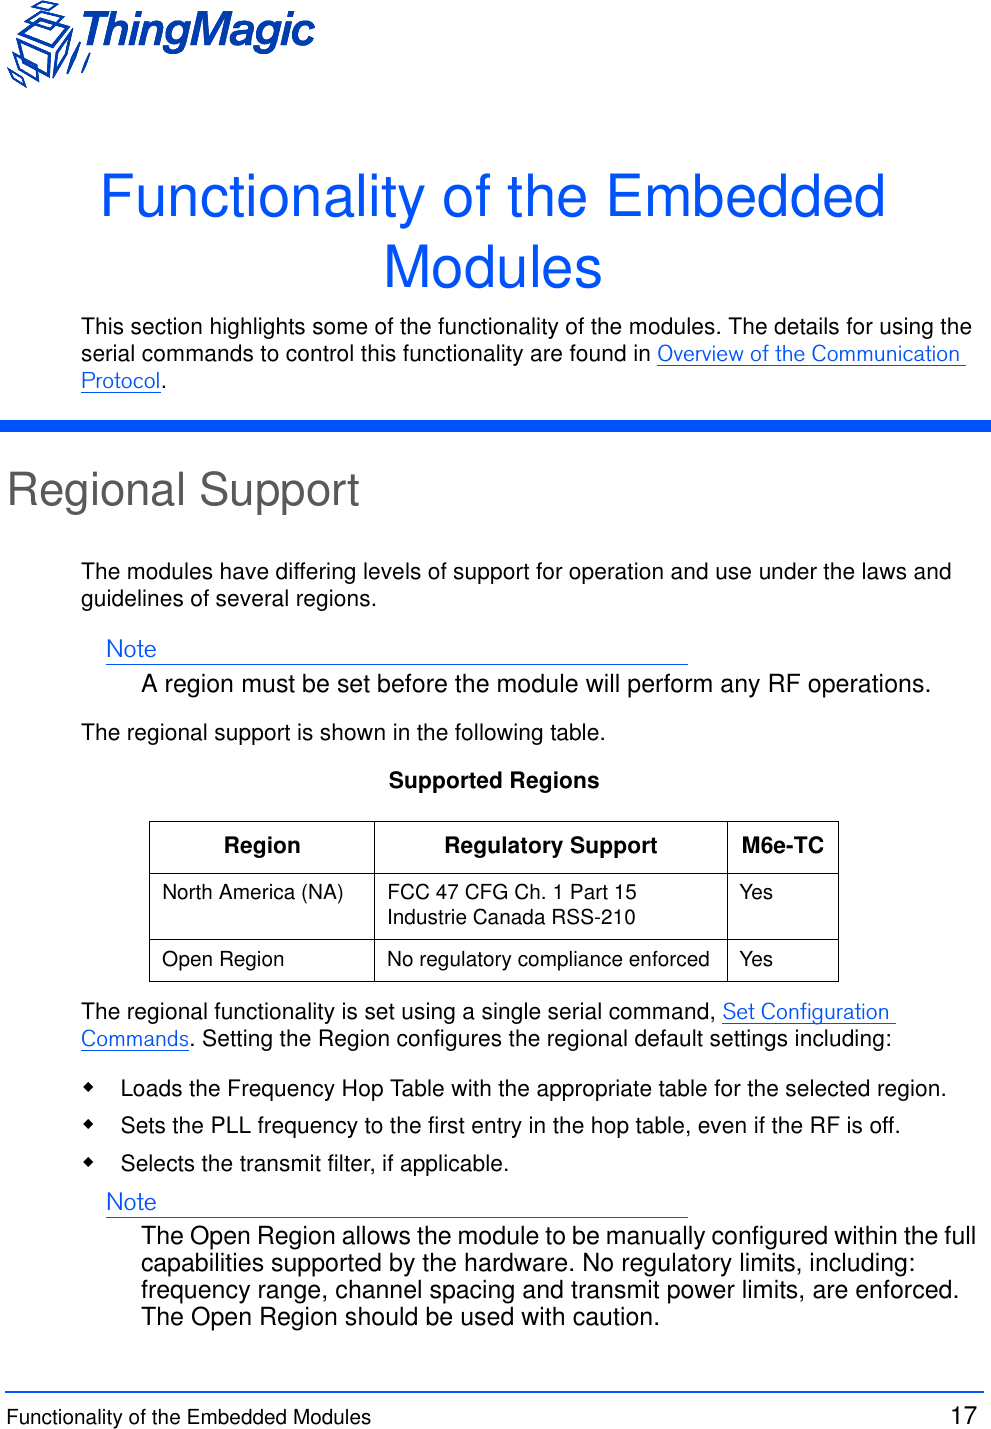 Functionality of the Embedded Modules  17 Functionality of the Embedded ModulesThis section highlights some of the functionality of the modules. The details for using the serial commands to control this functionality are found in Overview of the Communication Protocol.Regional Support The modules have differing levels of support for operation and use under the laws and guidelines of several regions. NoteA region must be set before the module will perform any RF operations.The regional support is shown in the following table.Supported RegionsThe regional functionality is set using a single serial command, Set Configuration Commands. Setting the Region configures the regional default settings including: Loads the Frequency Hop Table with the appropriate table for the selected region. Sets the PLL frequency to the first entry in the hop table, even if the RF is off. Selects the transmit filter, if applicable.NoteThe Open Region allows the module to be manually configured within the full capabilities supported by the hardware. No regulatory limits, including: frequency range, channel spacing and transmit power limits, are enforced. The Open Region should be used with caution.Region Regulatory Support M6e-TCNorth America (NA) FCC 47 CFG Ch. 1 Part 15Industrie Canada RSS-210 YesOpen Region No regulatory compliance enforced Yes